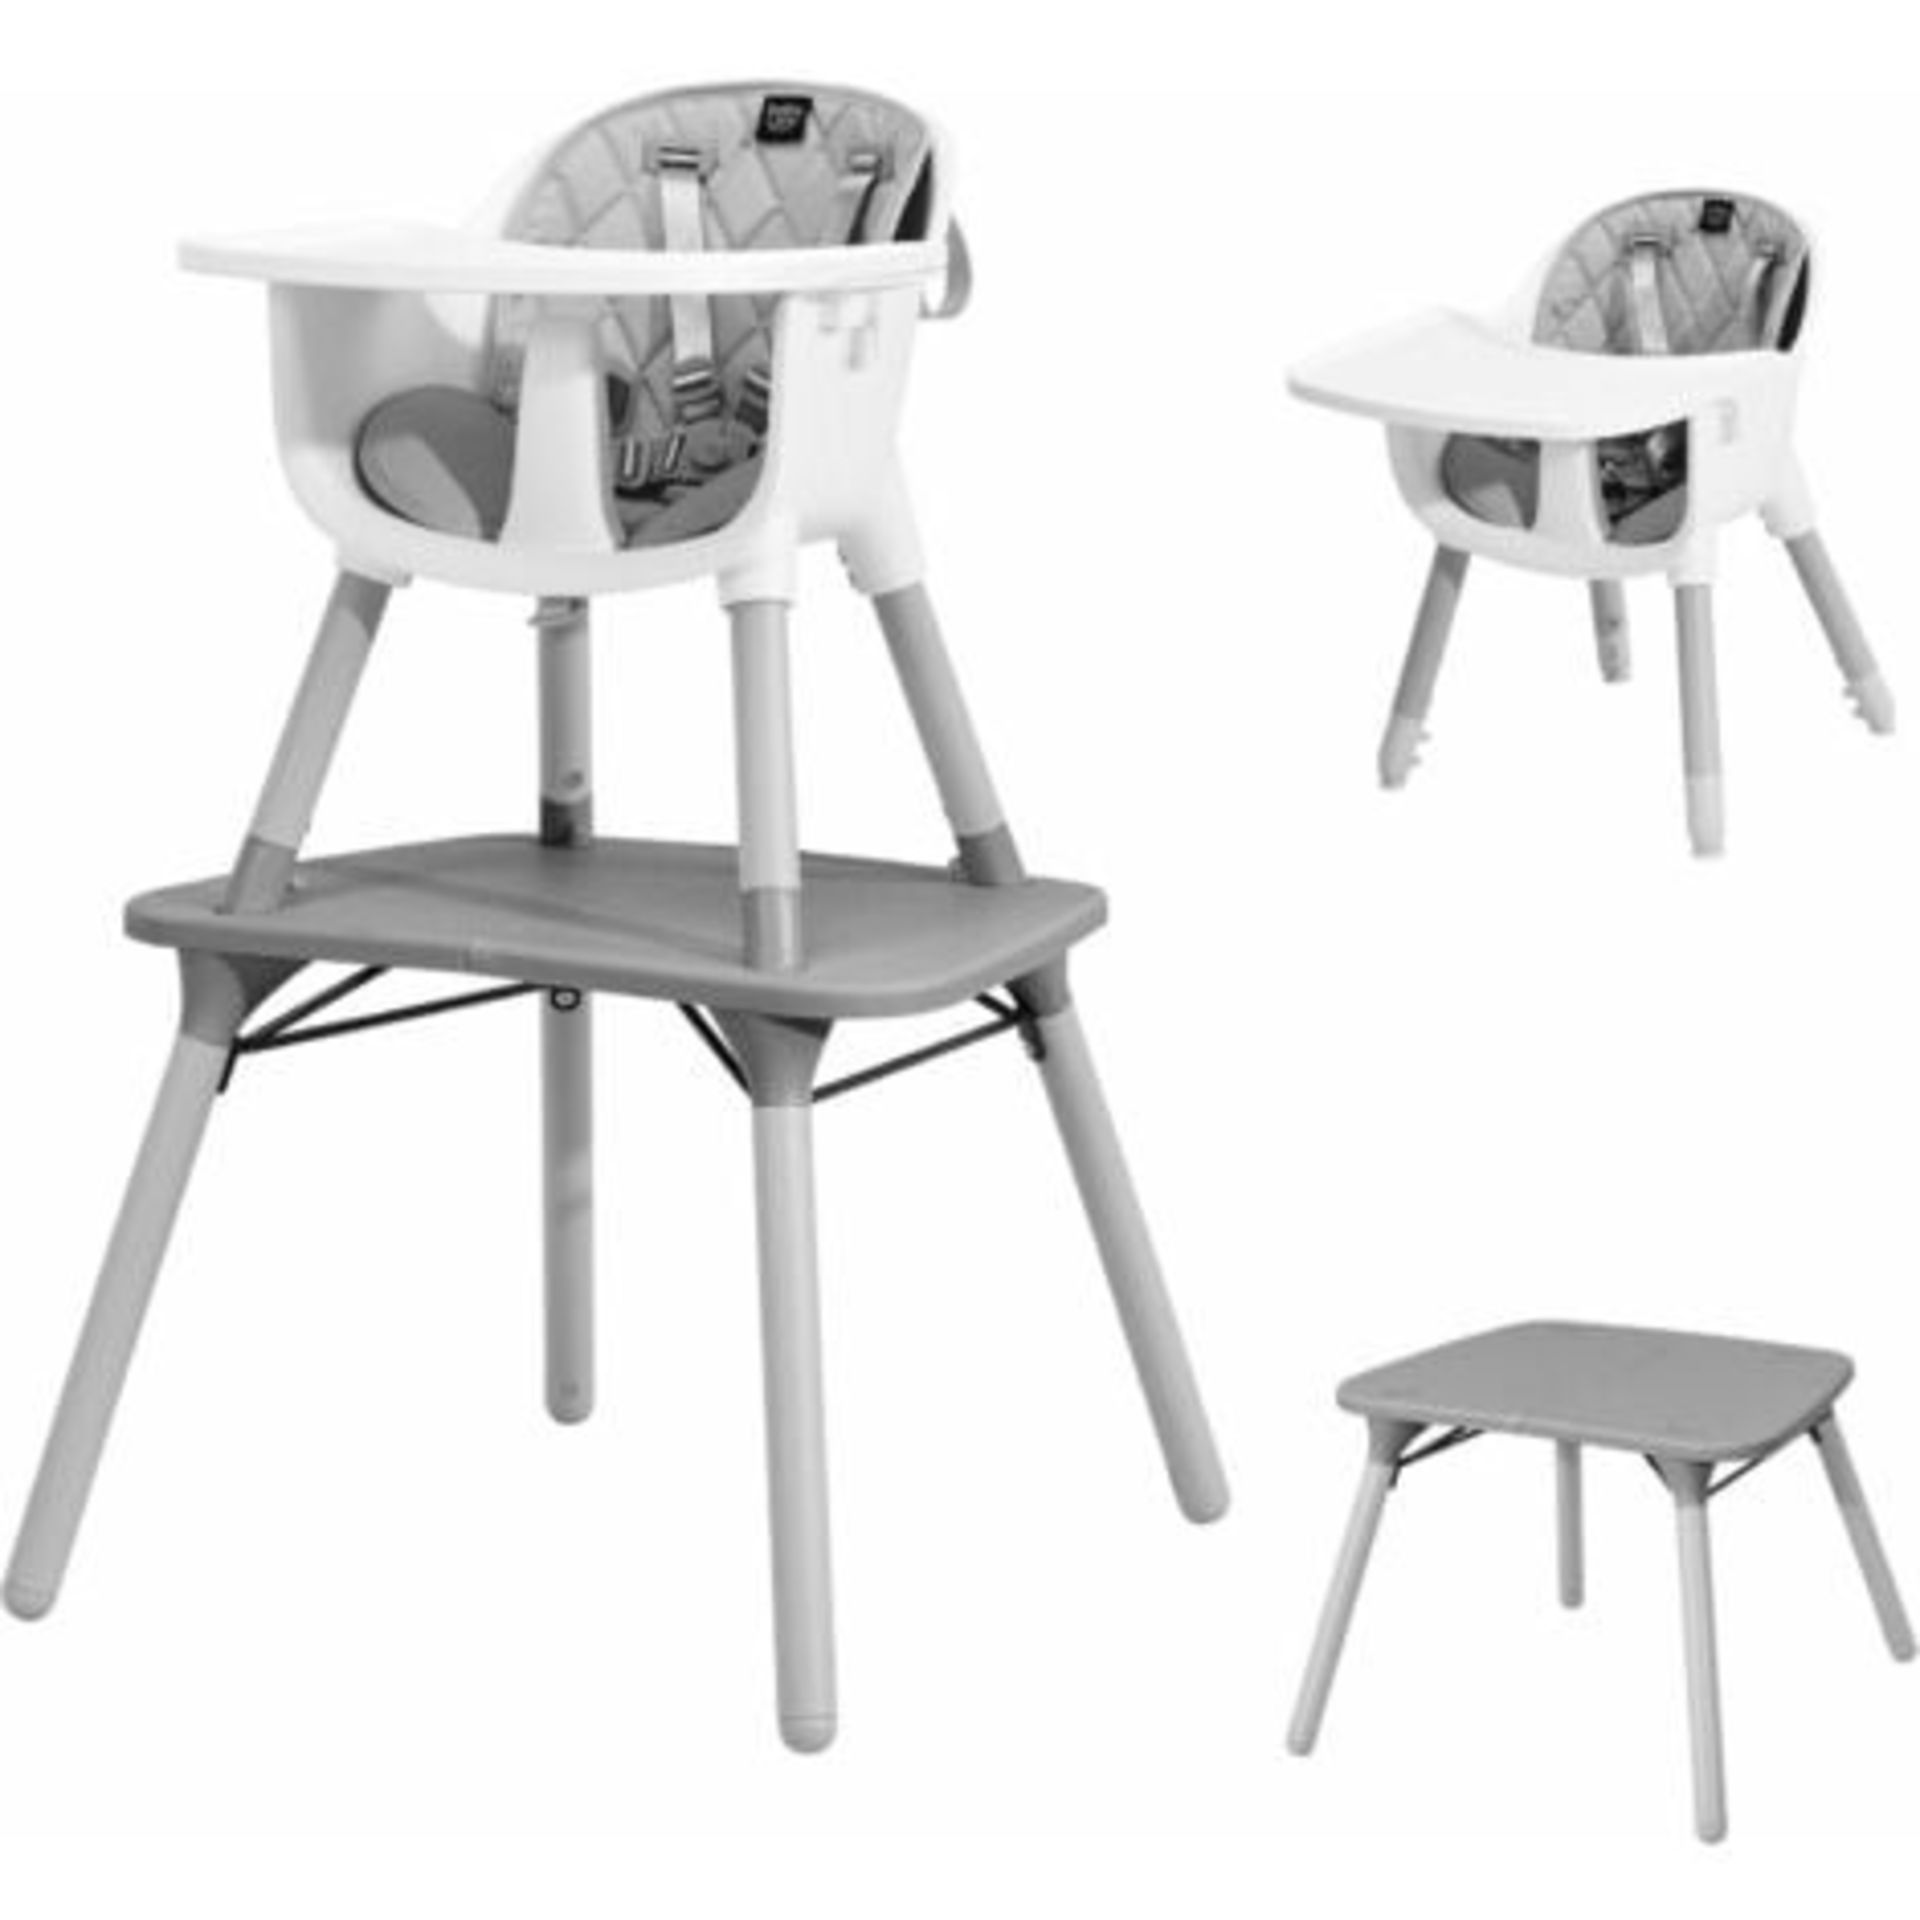 4 in 1 Baby Highchair Infant Feeding Seat Kids Table&Chair Set W/Adjustable Tray Grey - ER54